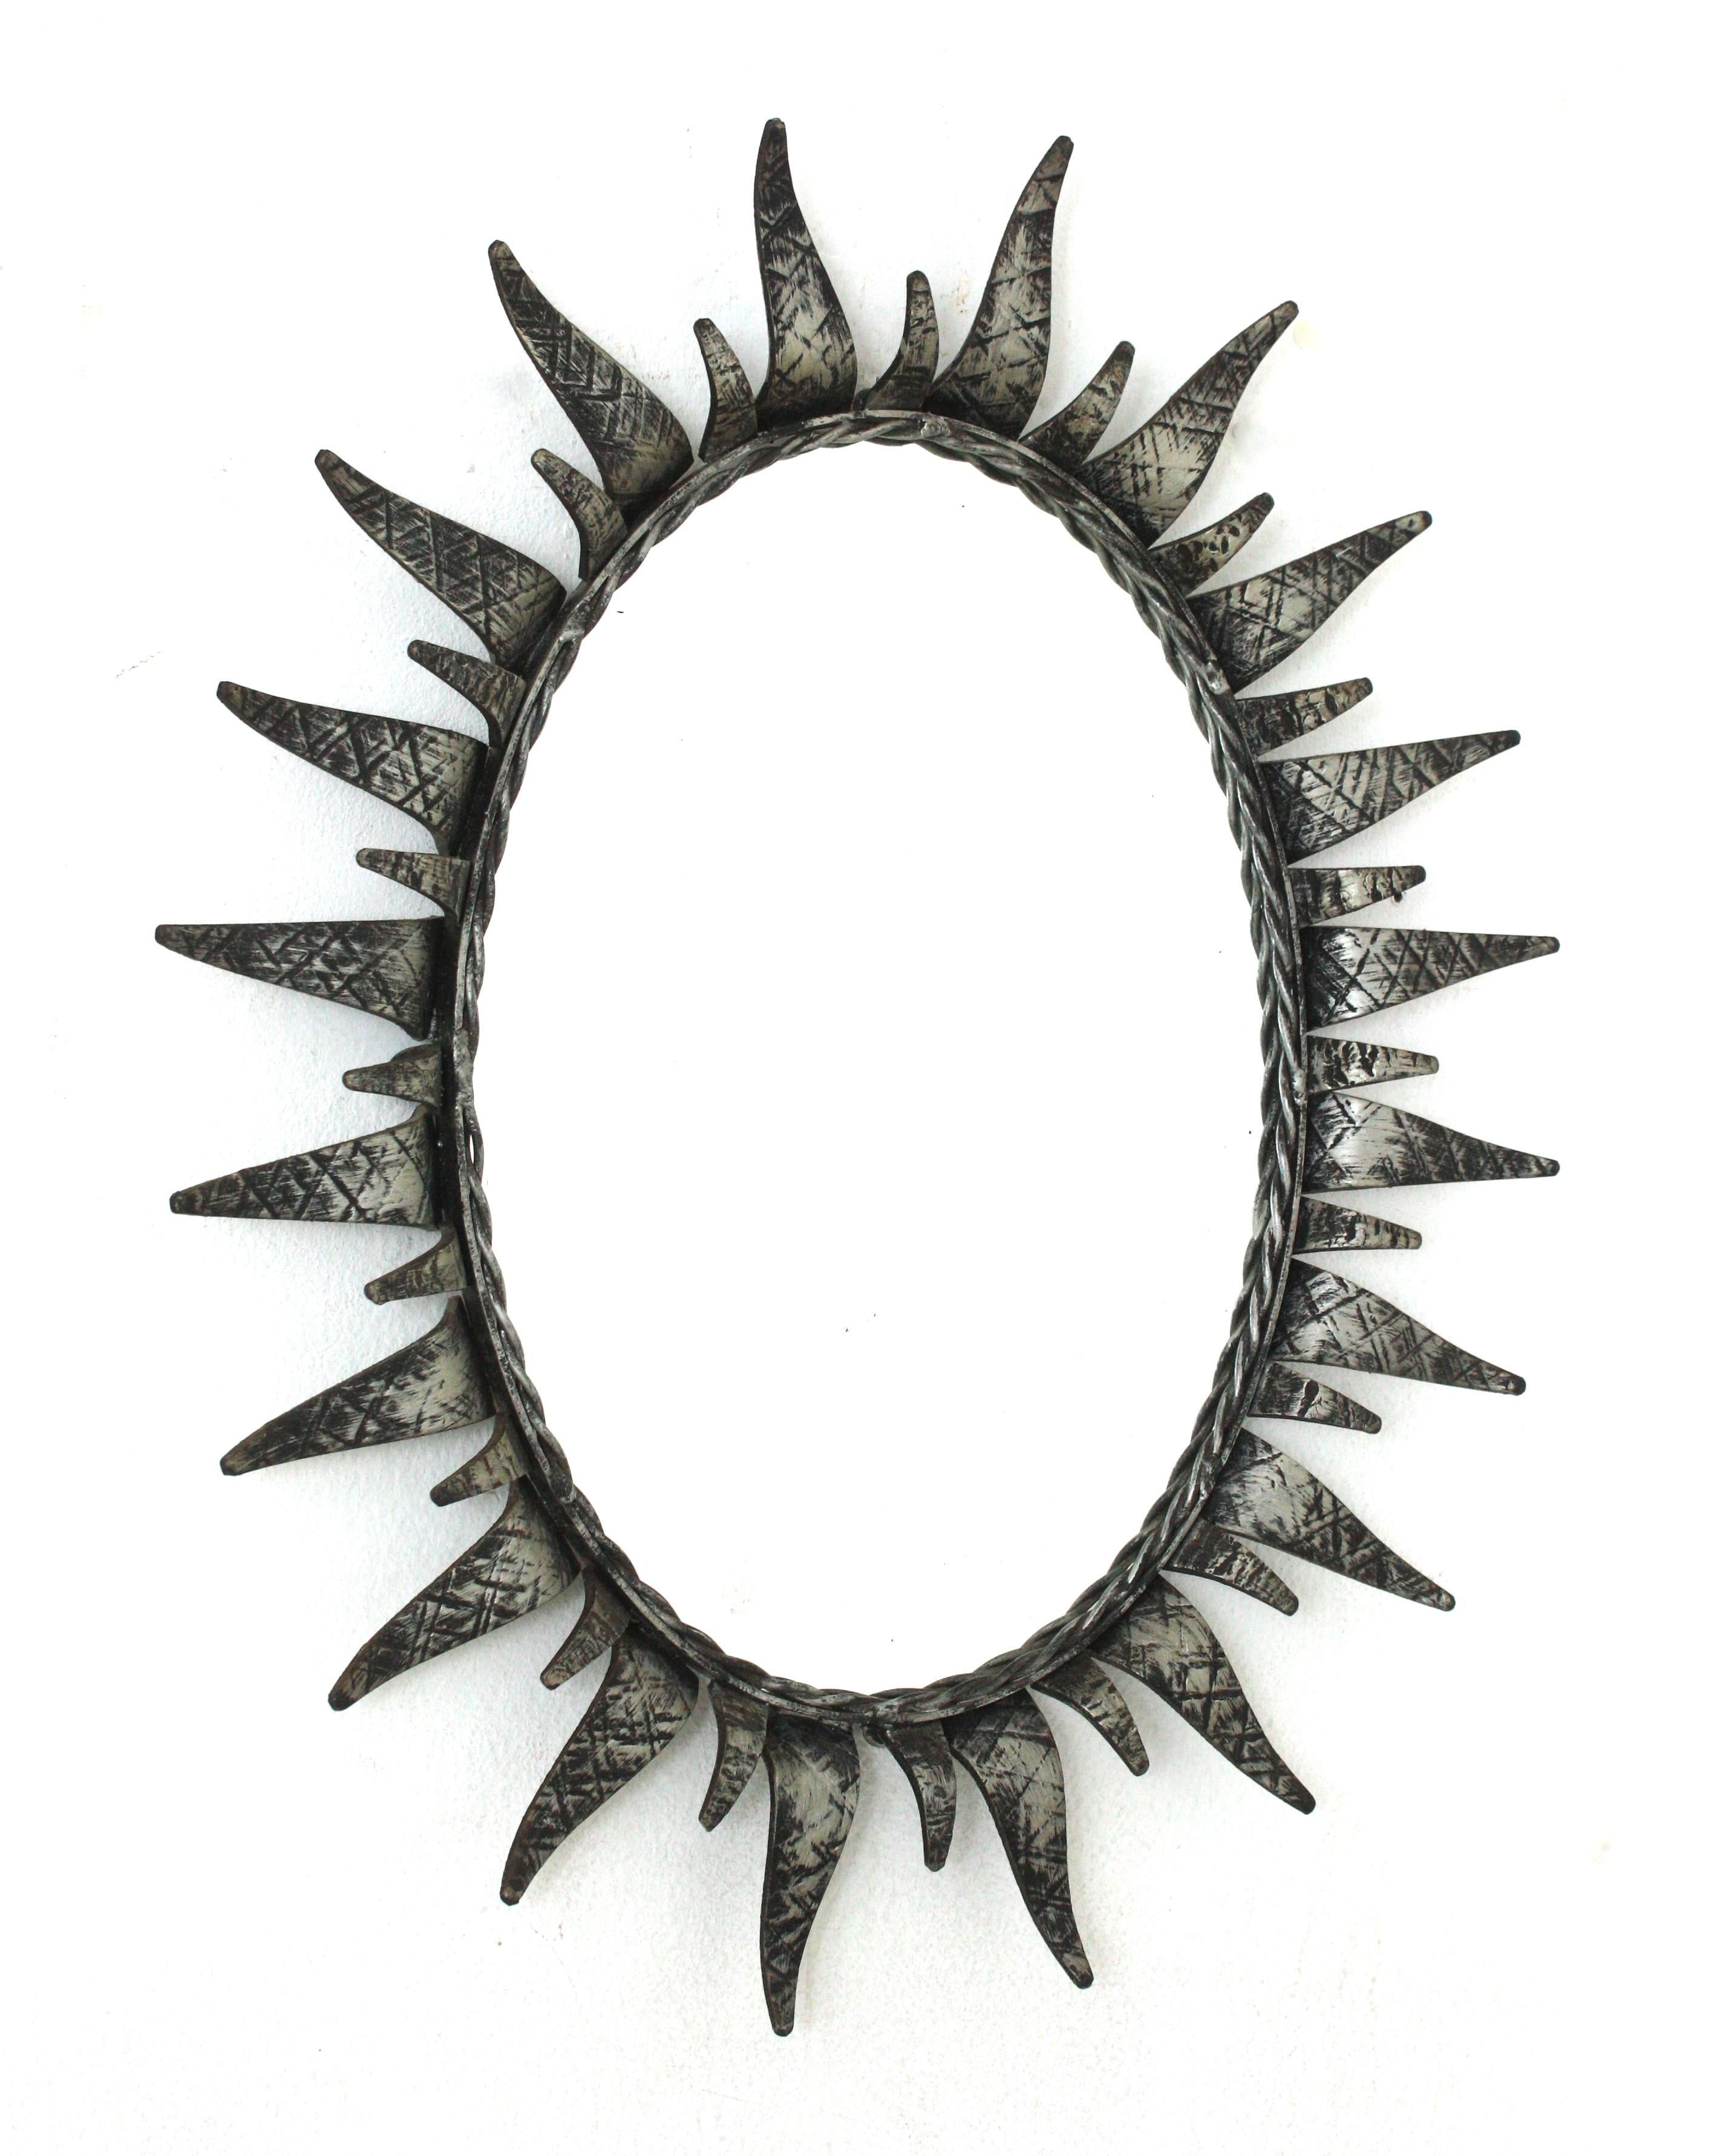 Mid-Century Modern wrought iron sunburst oval wall mirror with gilt silvered finish, Spain, 1950s.
This highly decorative sunburst iron mirror has a nice silver patinated color. It has terrific aged patina showing its original silvered finish. The